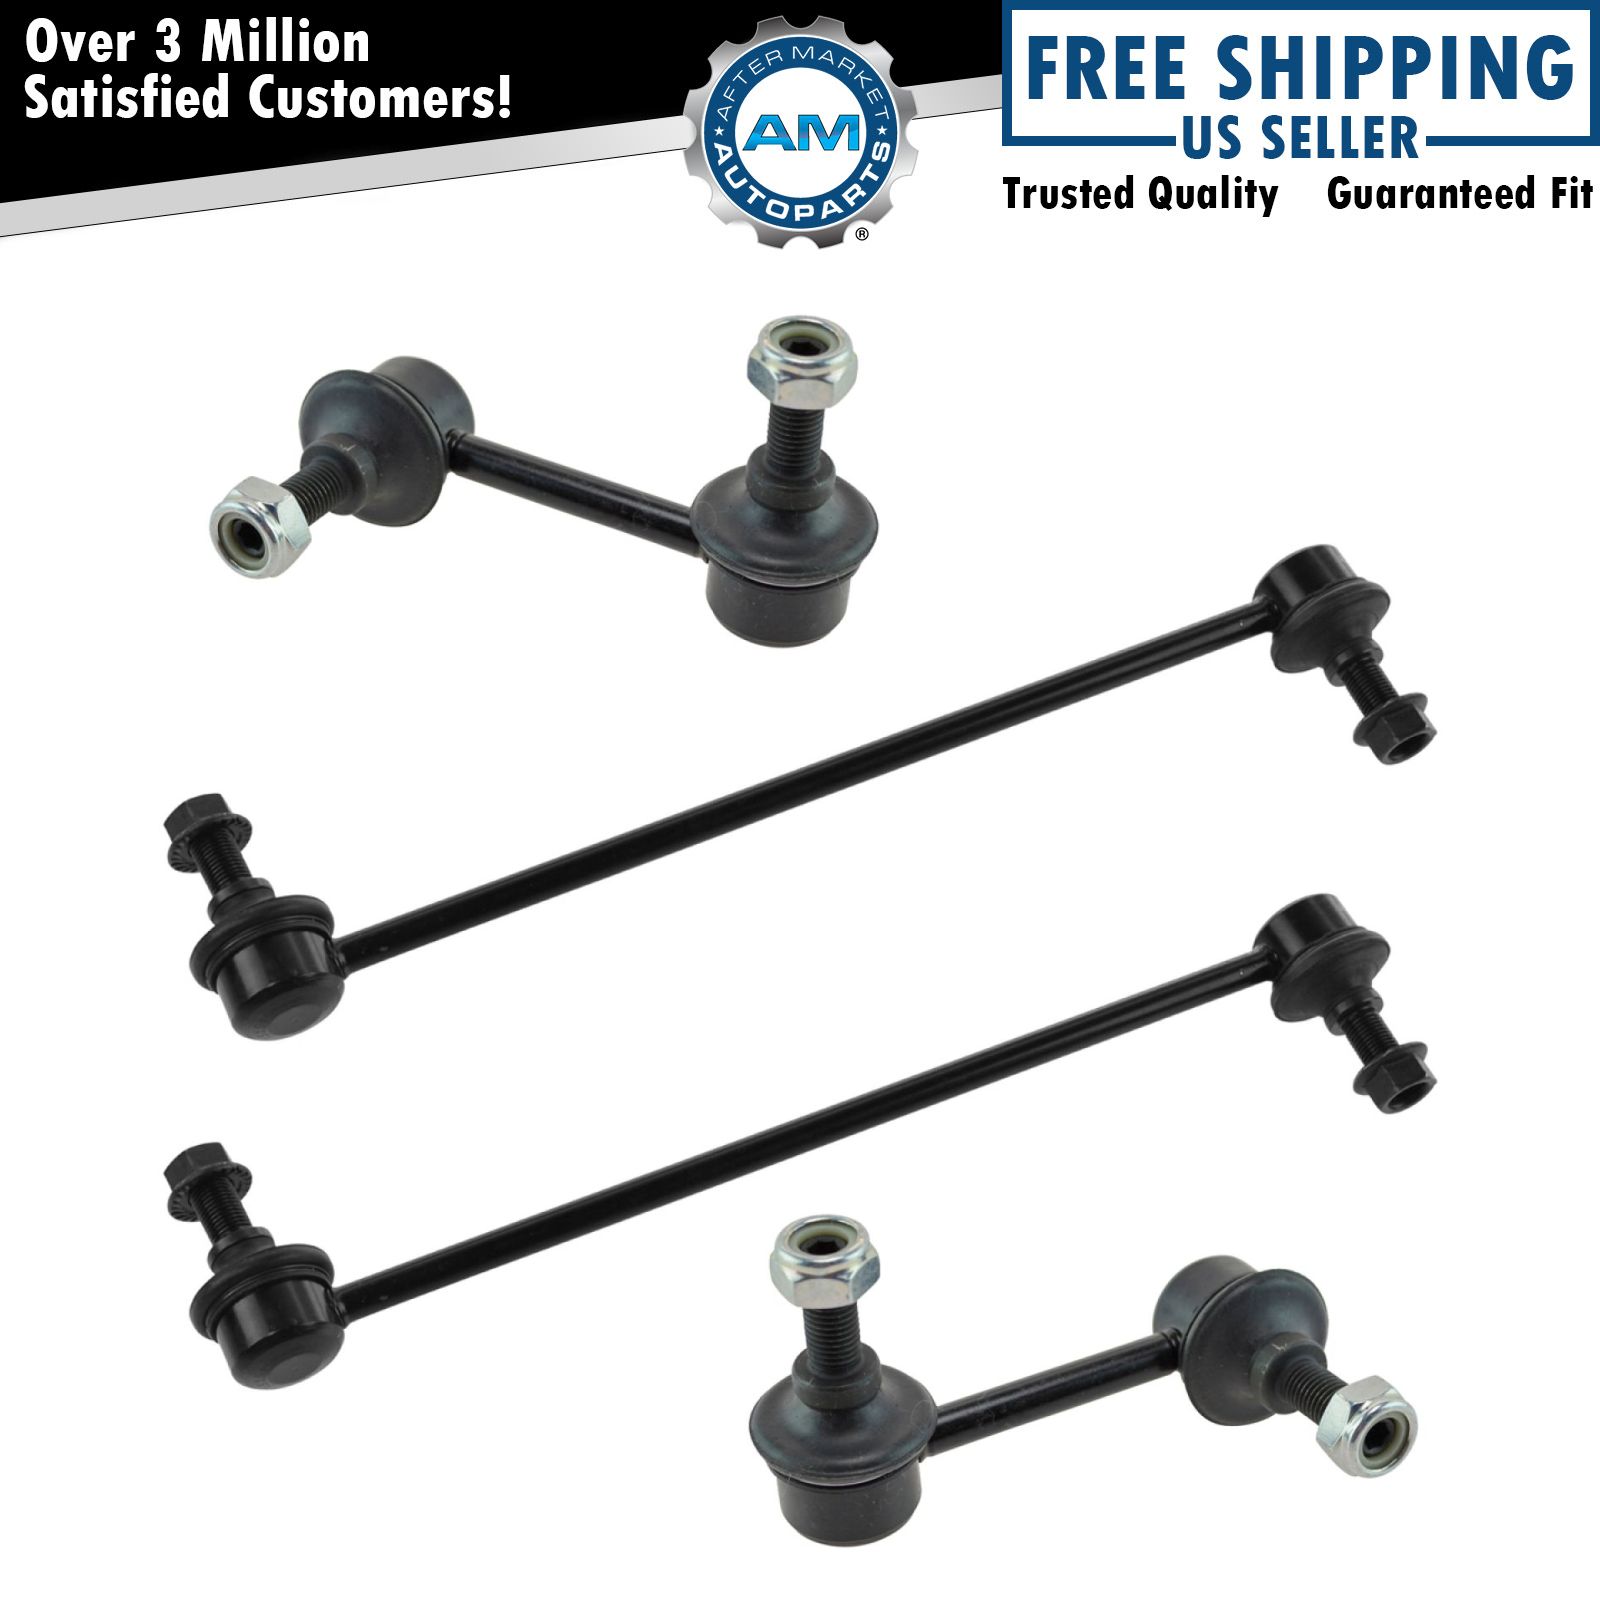 Pair Set of 2 Rear Suspension Stabilizer Bar Link Kits For Transit Connect 10-13